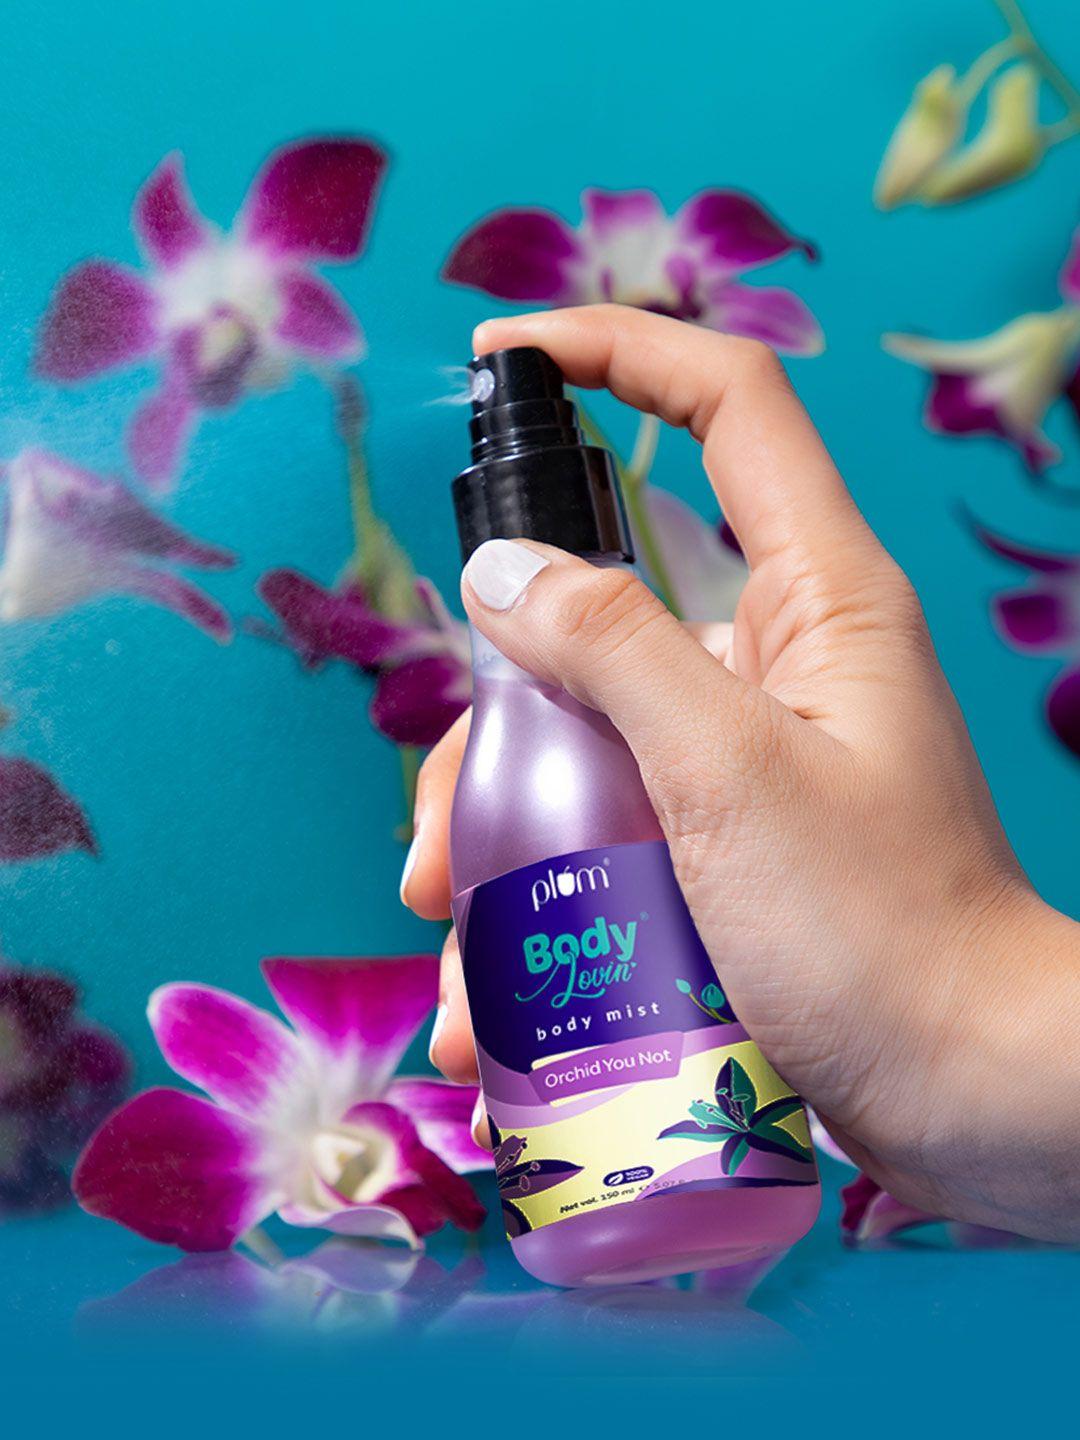 plum bodylovin orchid-you-not body mist with aloe juice 150 ml